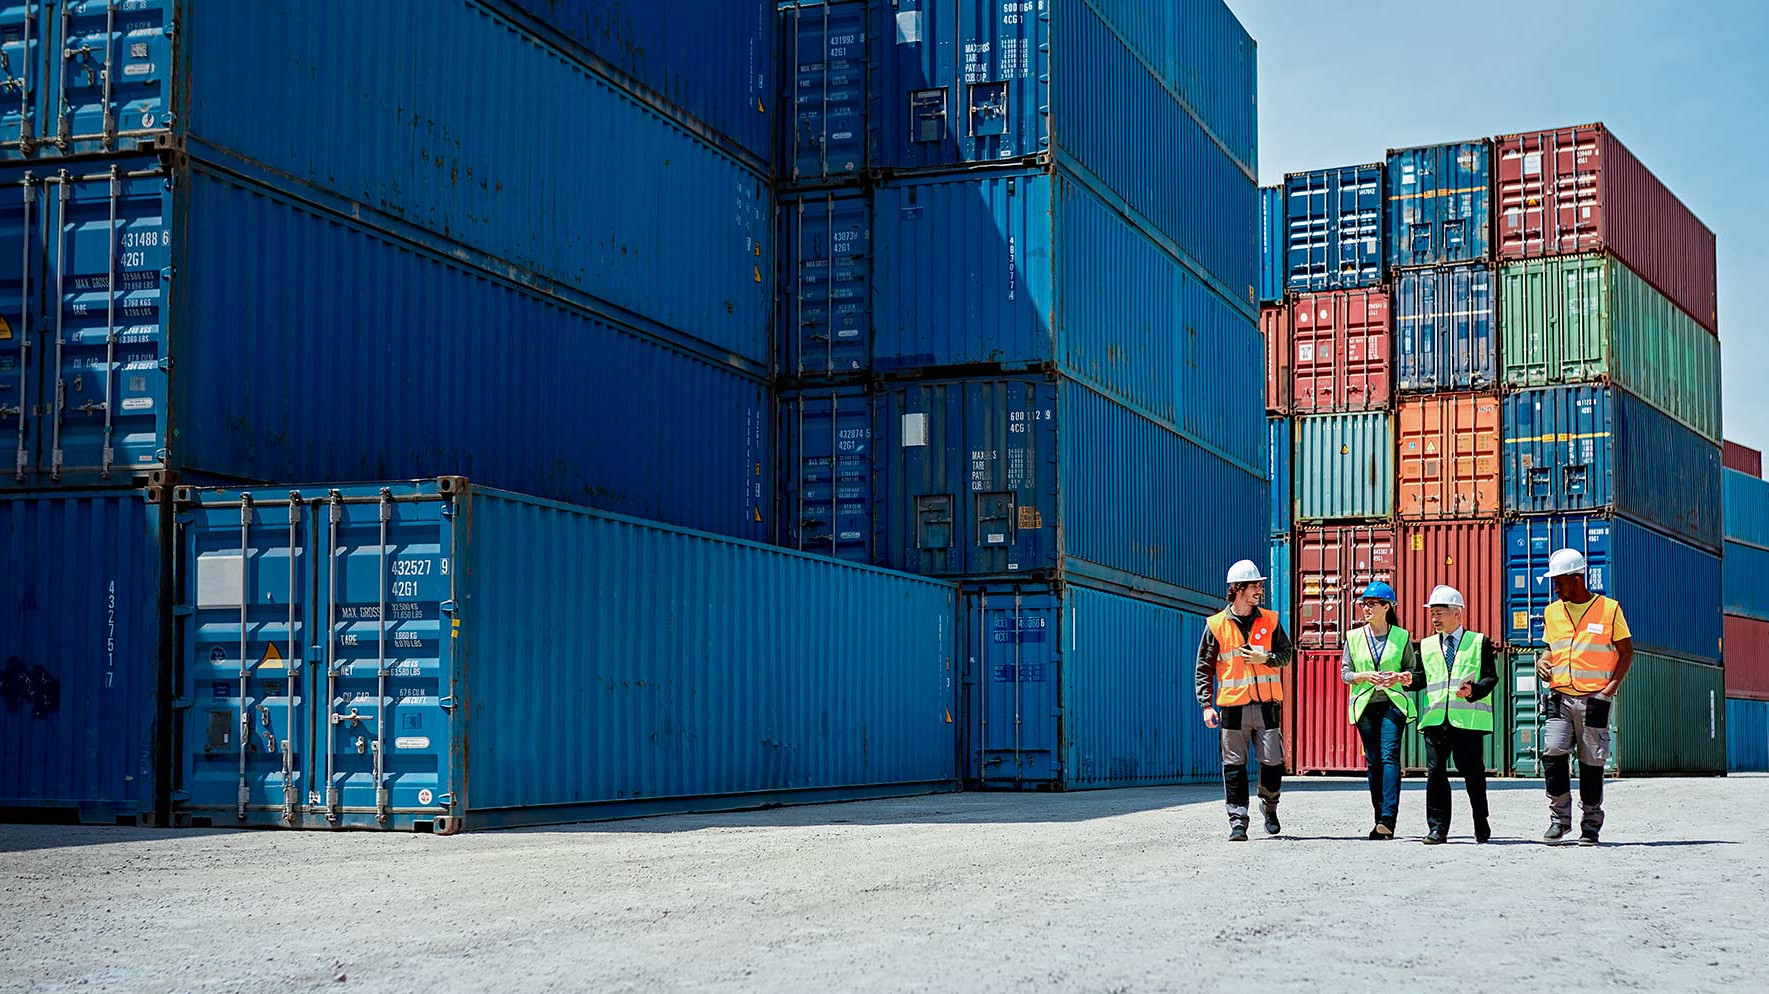 Employees walk between containers in the port